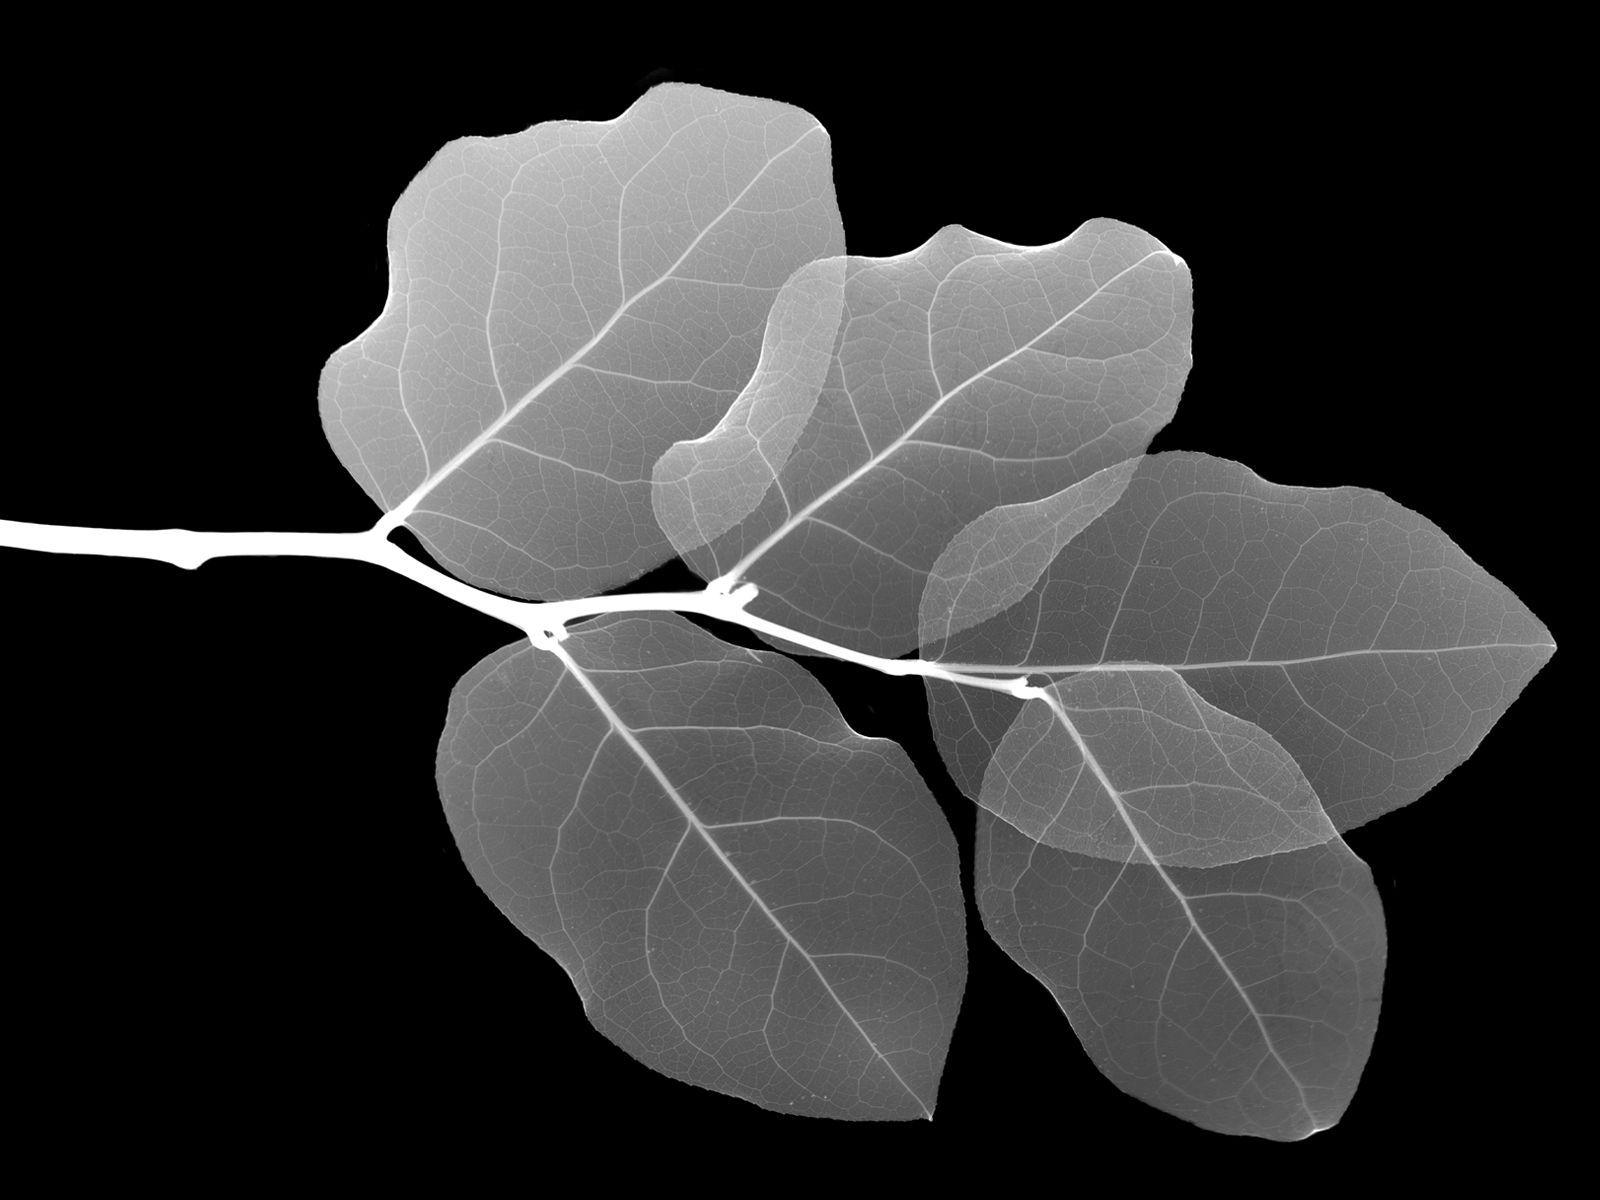 Black and White Leaf Wallpapers - Top Free Black and White Leaf